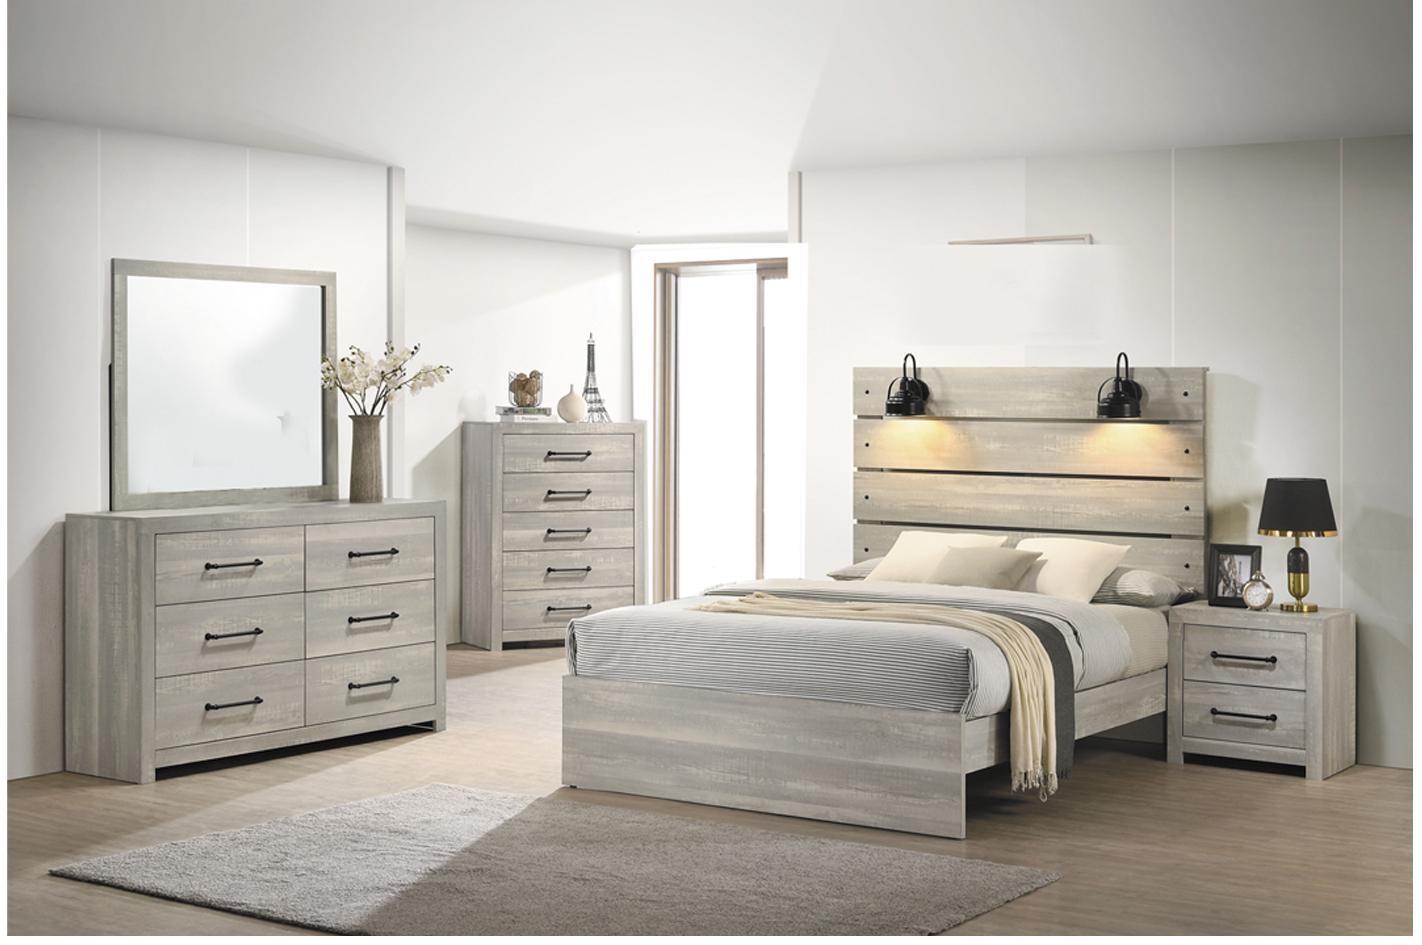 White Wash Bedroom Group with lighted headboard dresser mirror and nightstand